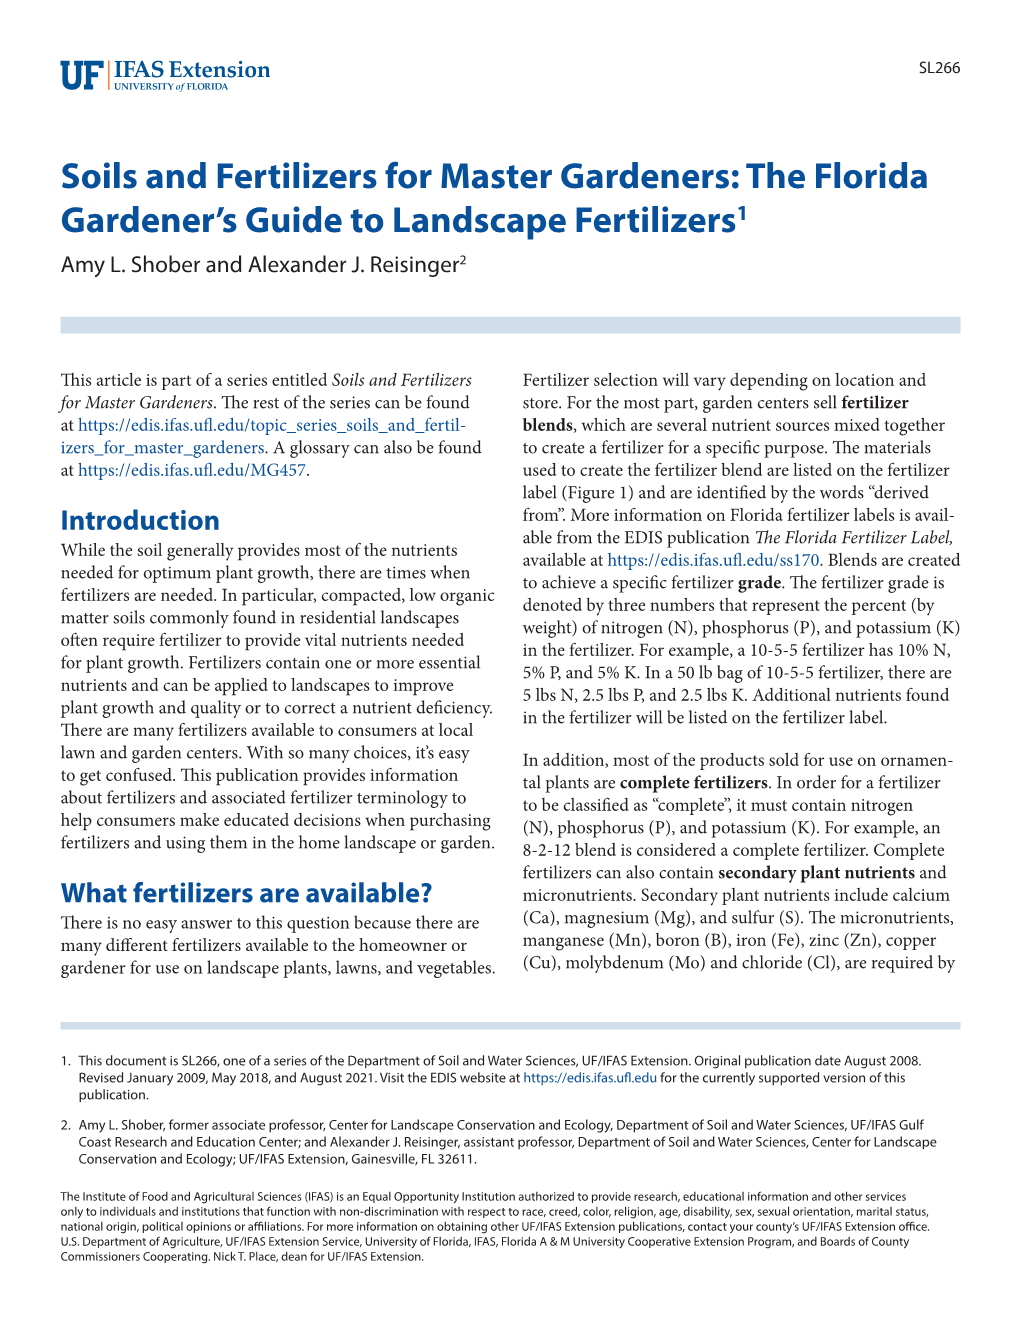 Soils and Fertilizers for Master Gardeners: the Florida Gardener’S Guide to Landscape Fertilizers1 Amy L